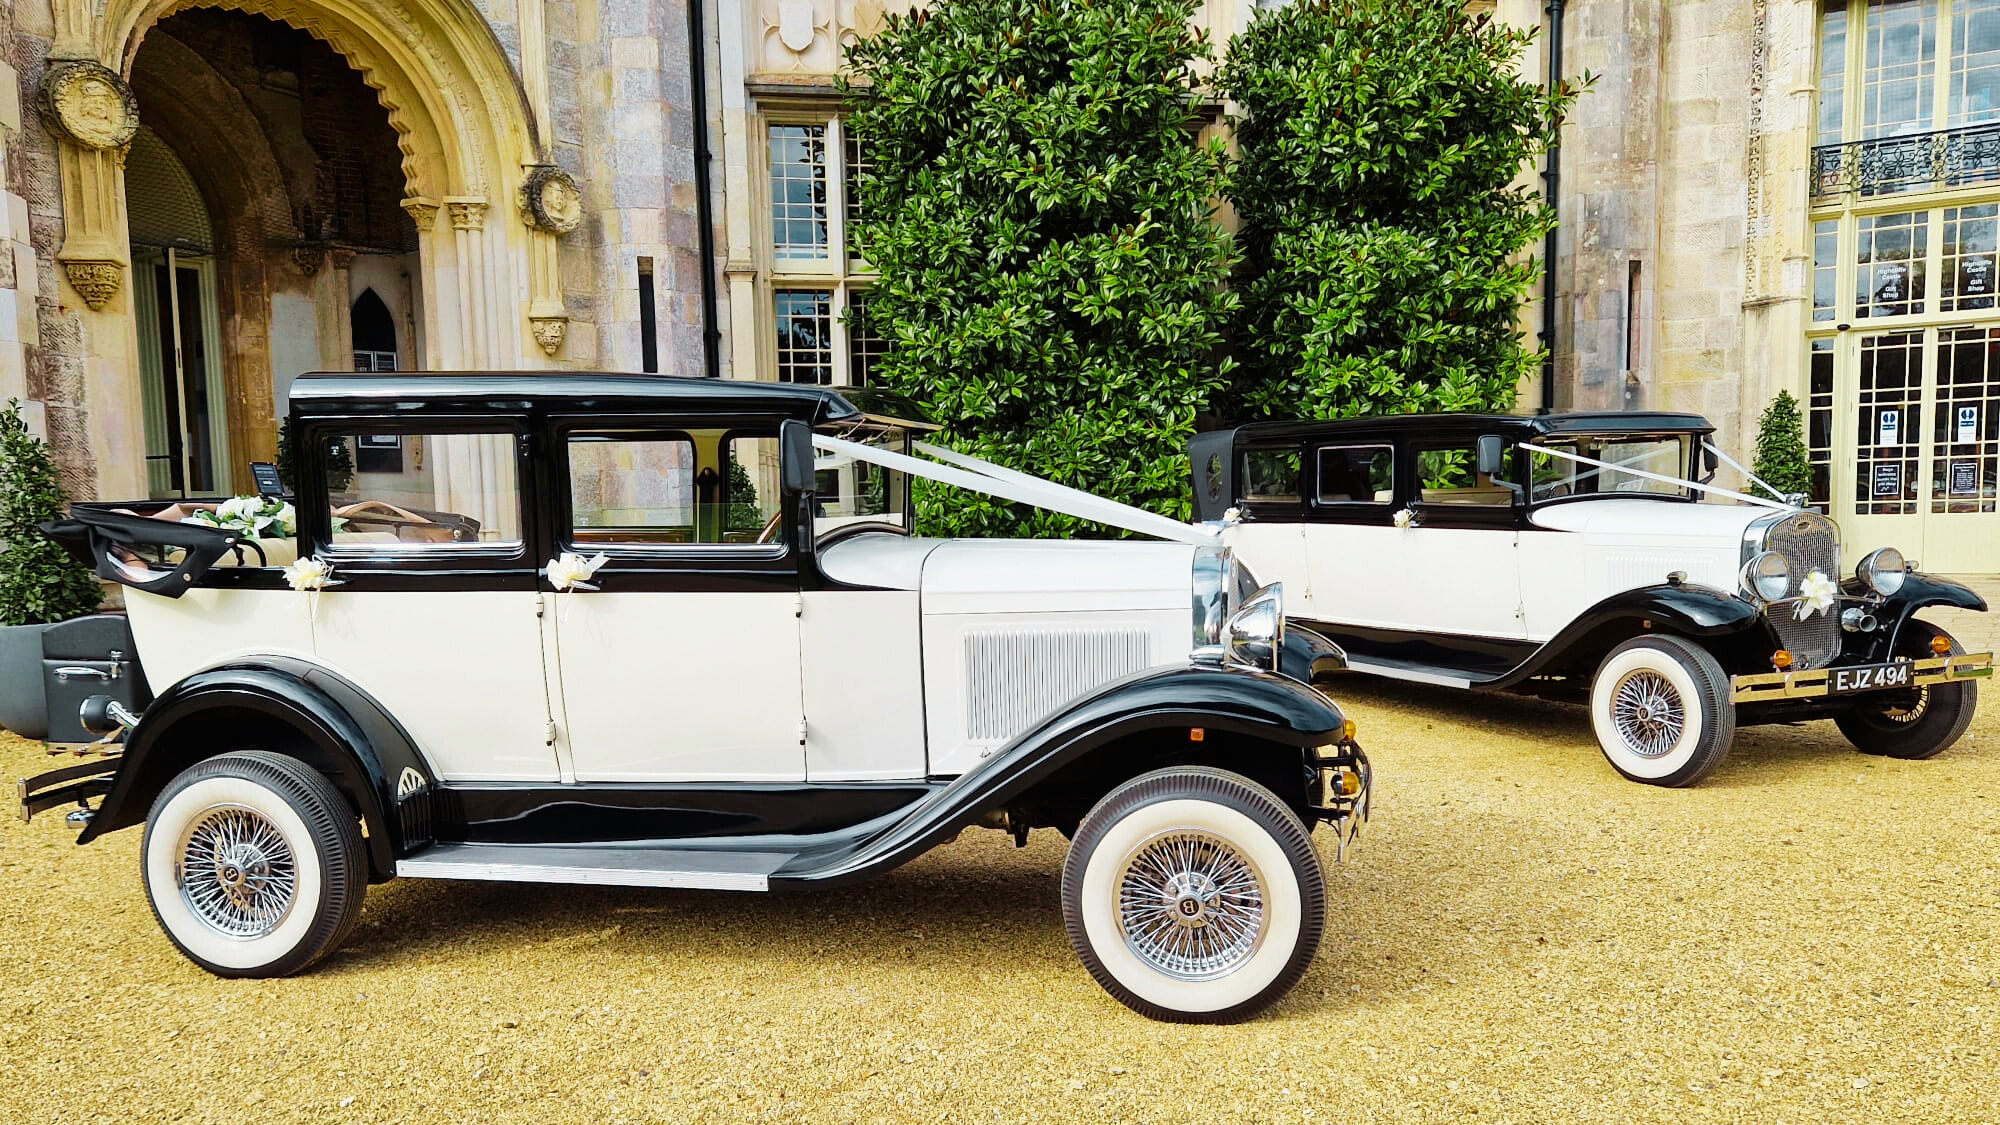 Two matching vintage wedding cars decorated with matching white ribbons. Vehicles are parked at the front entrance of a local wedding venue in Wool.